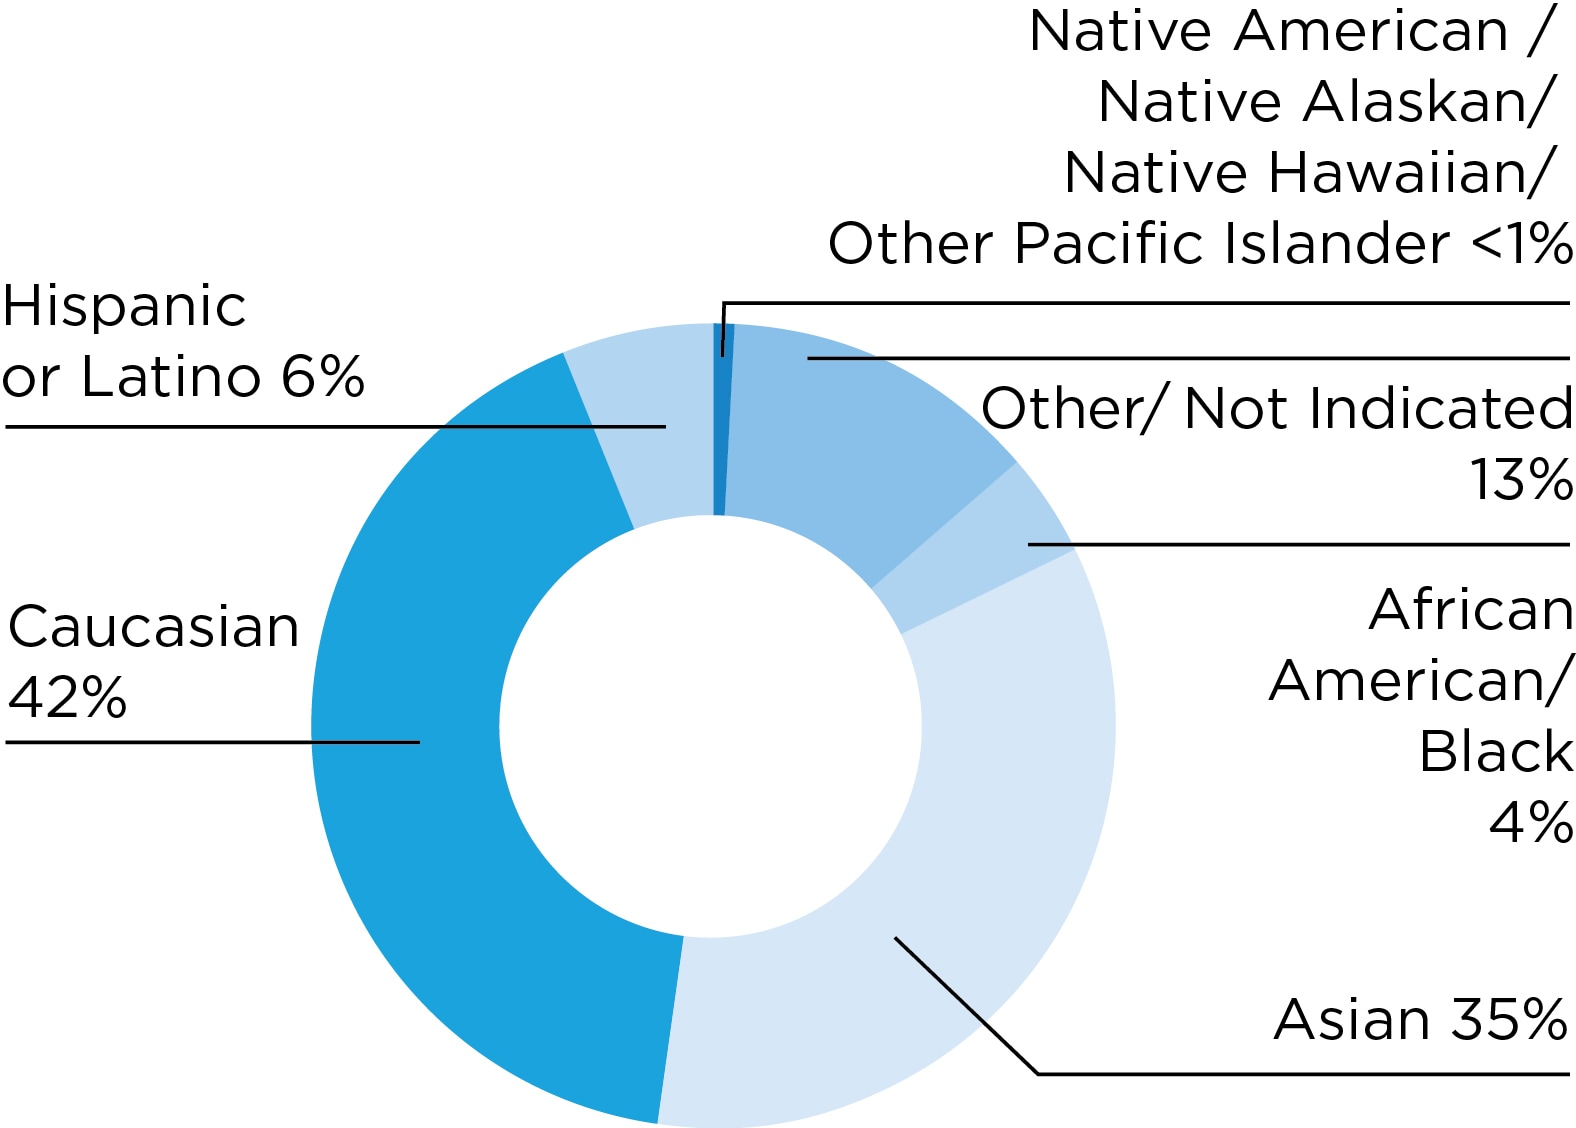 Chart: AACR members by race/ethnicity: Caucasian, 42 percent; Asian, 35 percent; Hispanic or Latino, 6 percent; African American/Black, 4 percent; Native American/Native Alaskan/Native Hawaiian/Other Pacific Islander, <1 percent; Other/not indicated, 13 percent.